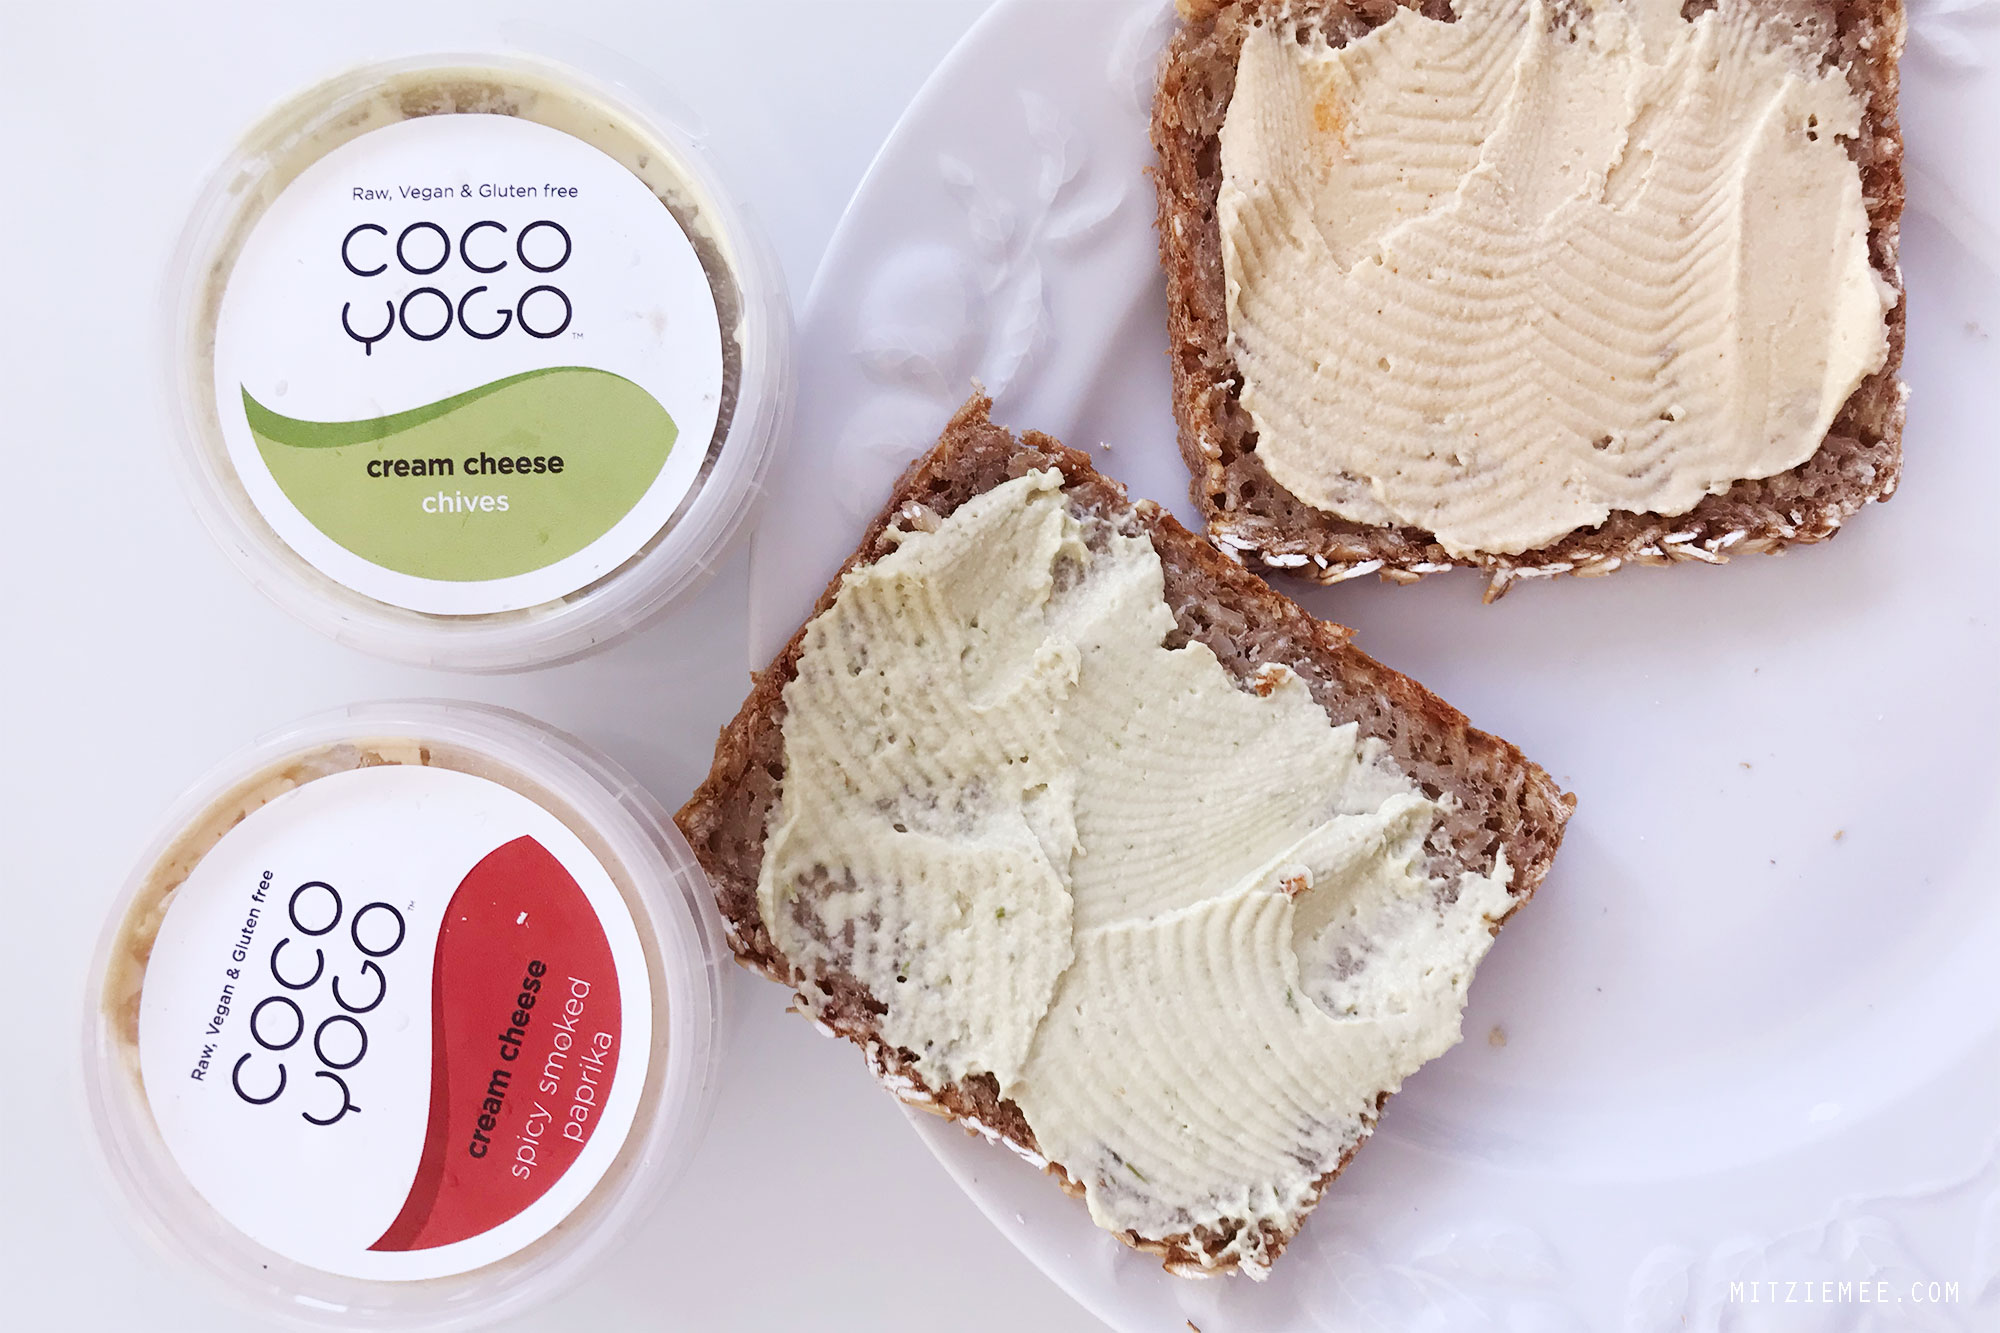 Coco Yogo cream cheese with chives